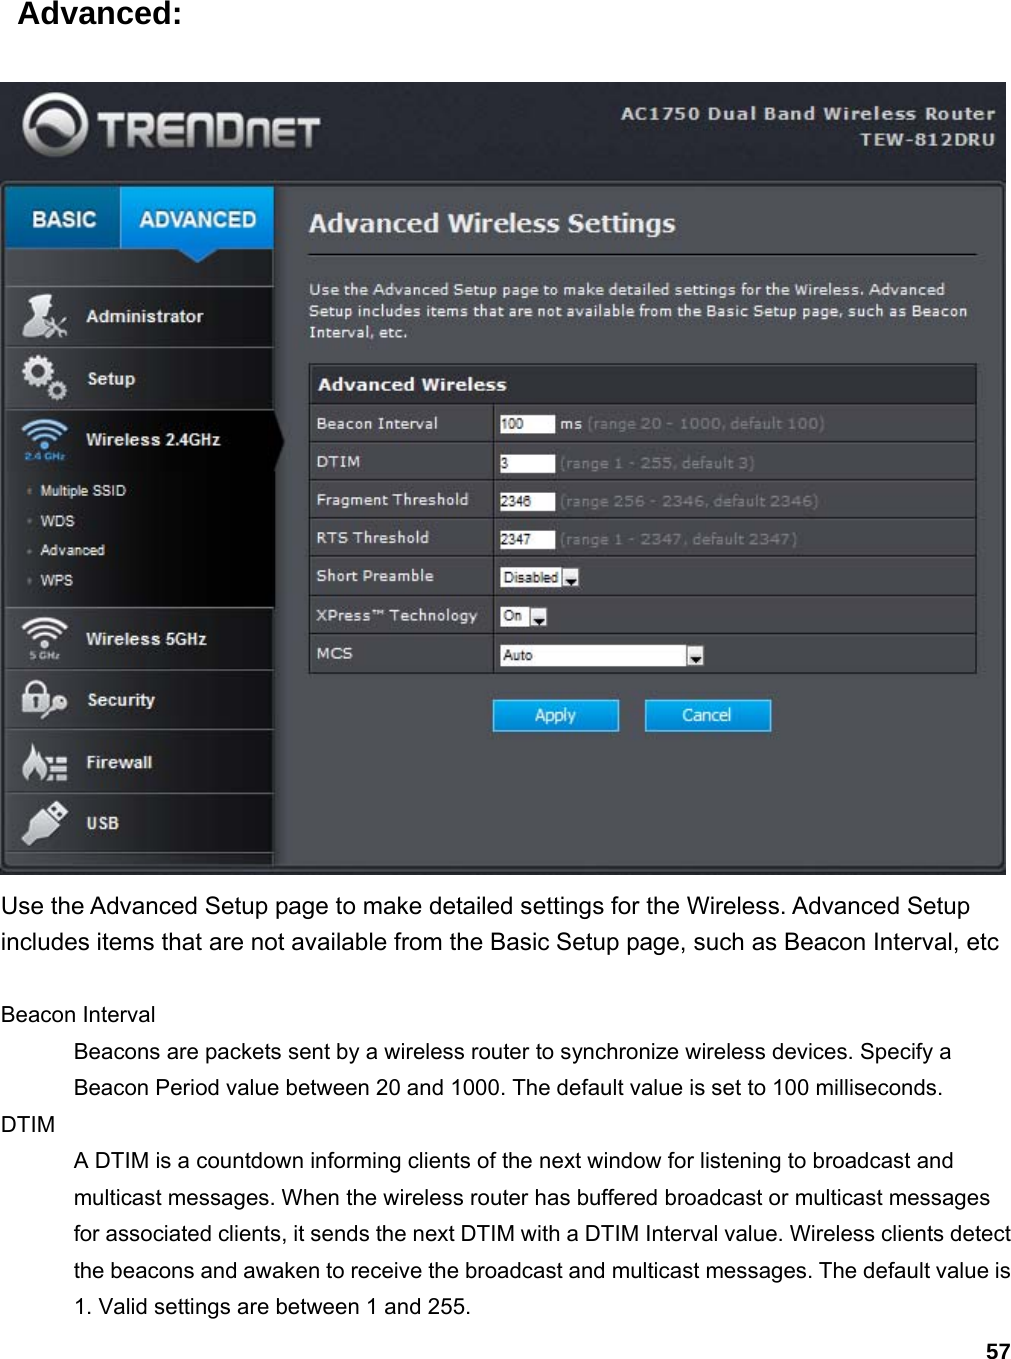 57  Advanced:  Use the Advanced Setup page to make detailed settings for the Wireless. Advanced Setup includes items that are not available from the Basic Setup page, such as Beacon Interval, etc  Beacon Interval   Beacons are packets sent by a wireless router to synchronize wireless devices. Specify a Beacon Period value between 20 and 1000. The default value is set to 100 milliseconds.   DTIM  A DTIM is a countdown informing clients of the next window for listening to broadcast and multicast messages. When the wireless router has buffered broadcast or multicast messages for associated clients, it sends the next DTIM with a DTIM Interval value. Wireless clients detect the beacons and awaken to receive the broadcast and multicast messages. The default value is 1. Valid settings are between 1 and 255.   